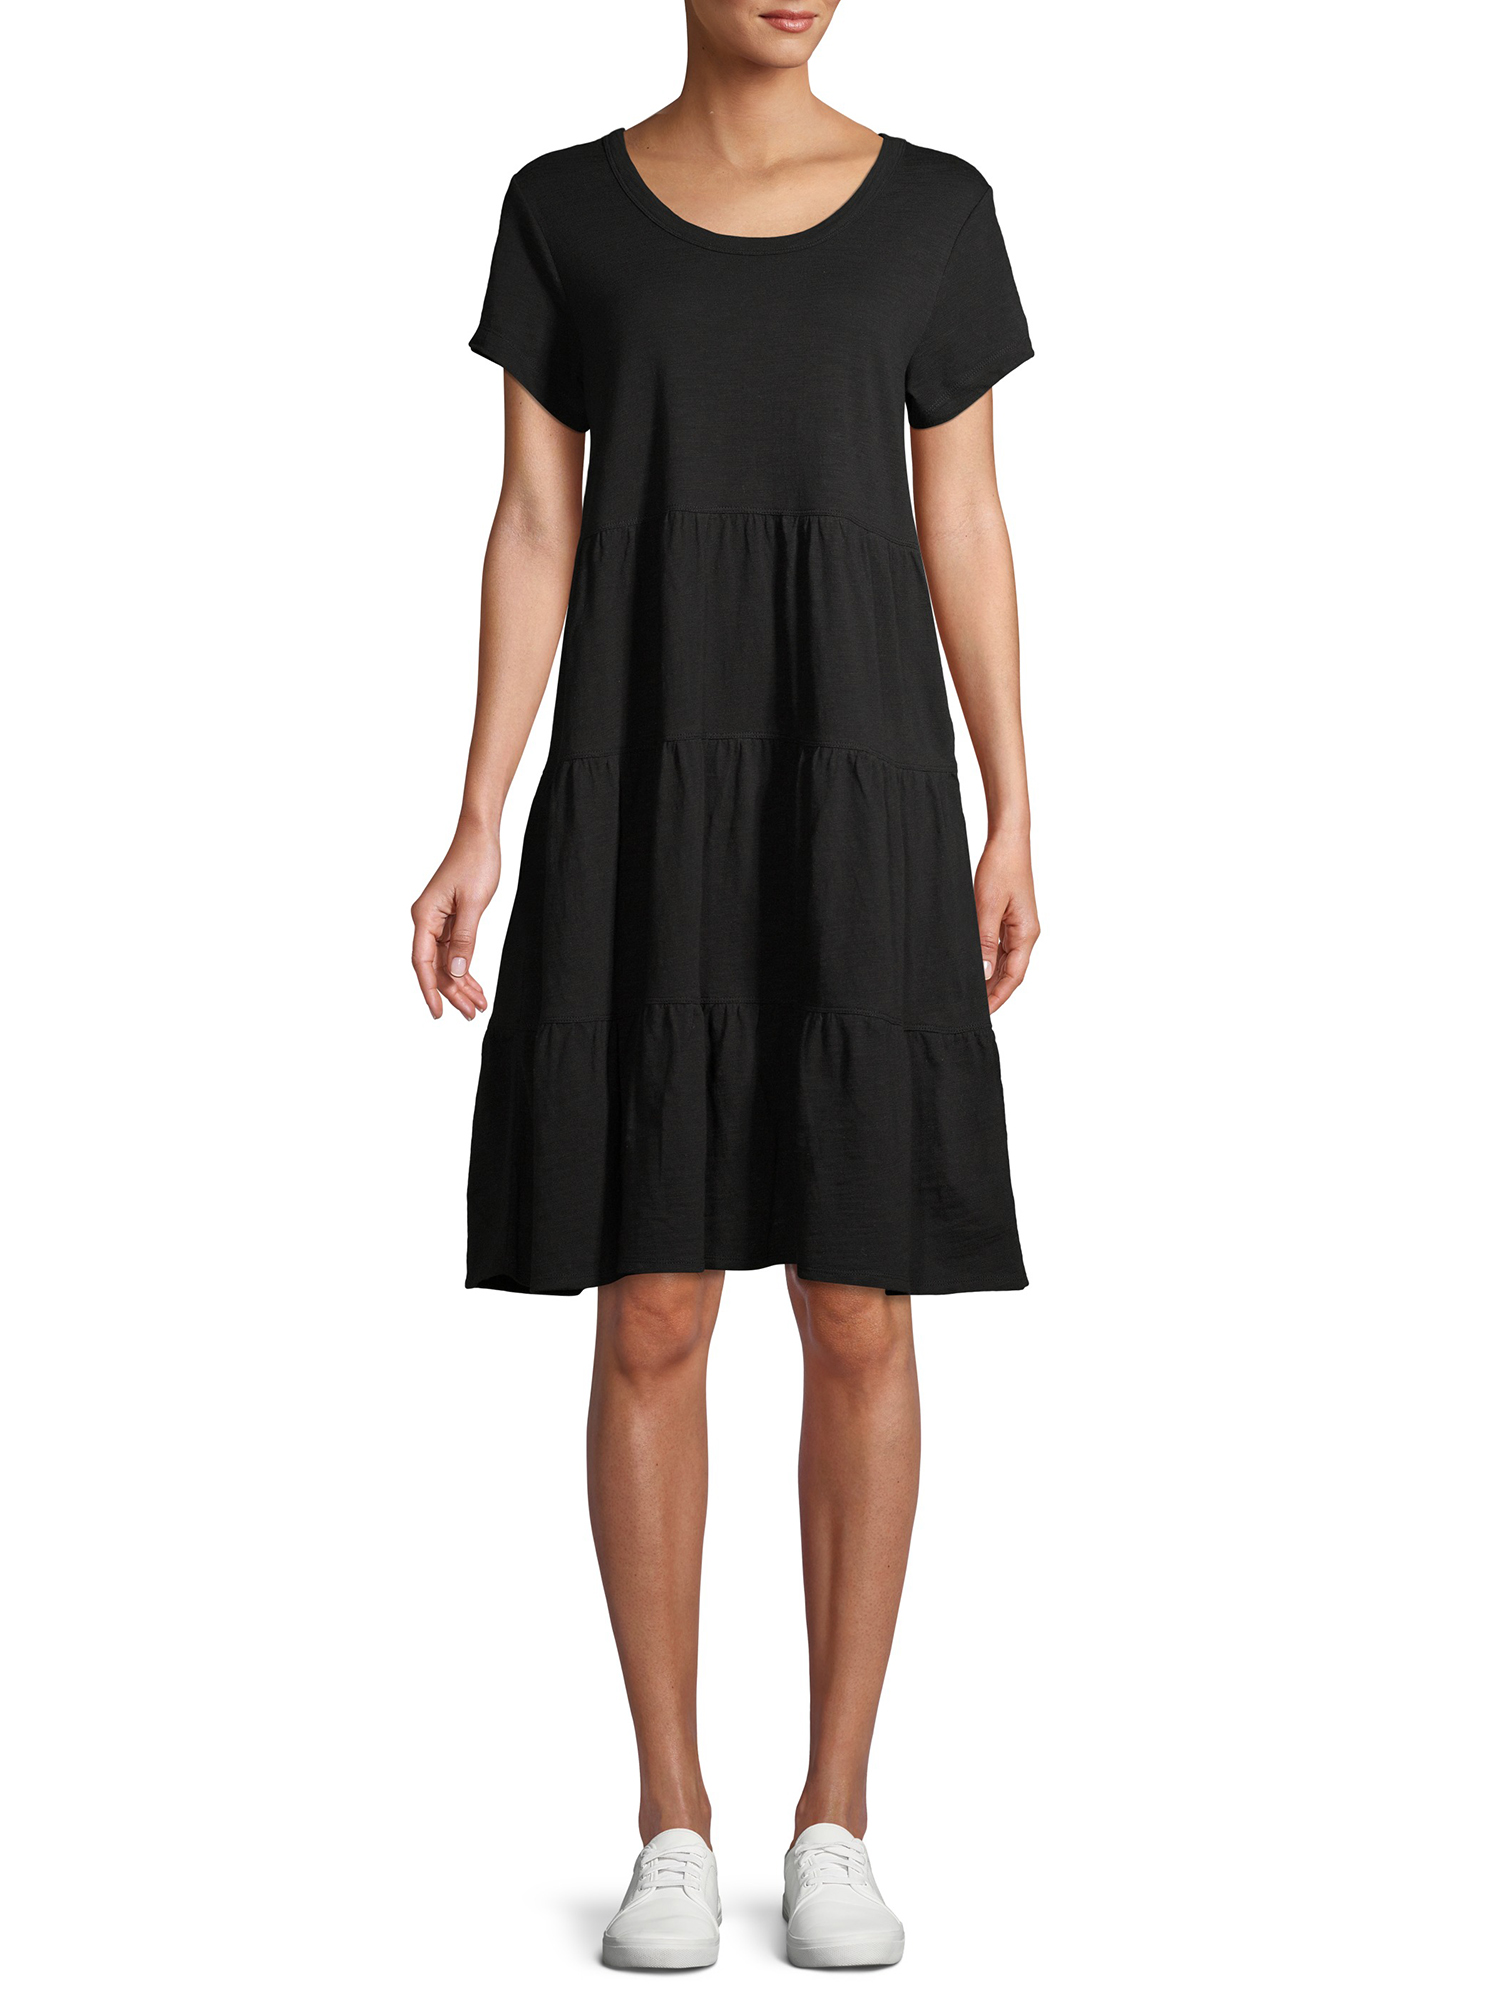 Time and Tru Women's Tiered Knit Dress - image 5 of 6